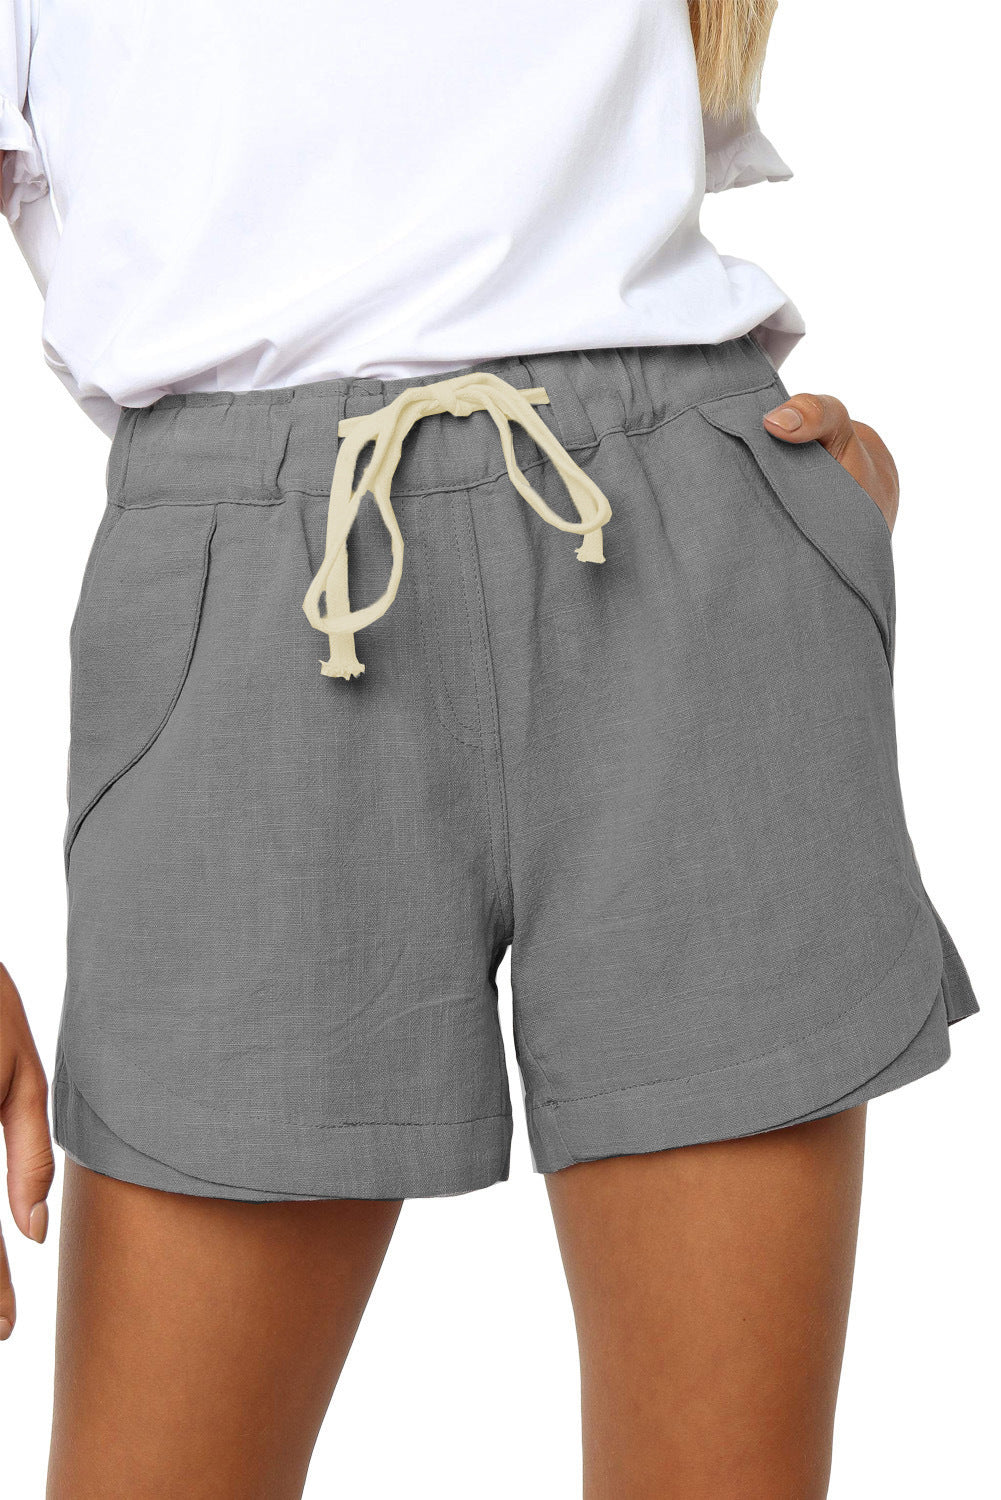 Summer Pleated Pocket A Line Stretch Lace Up High Waist Shorts